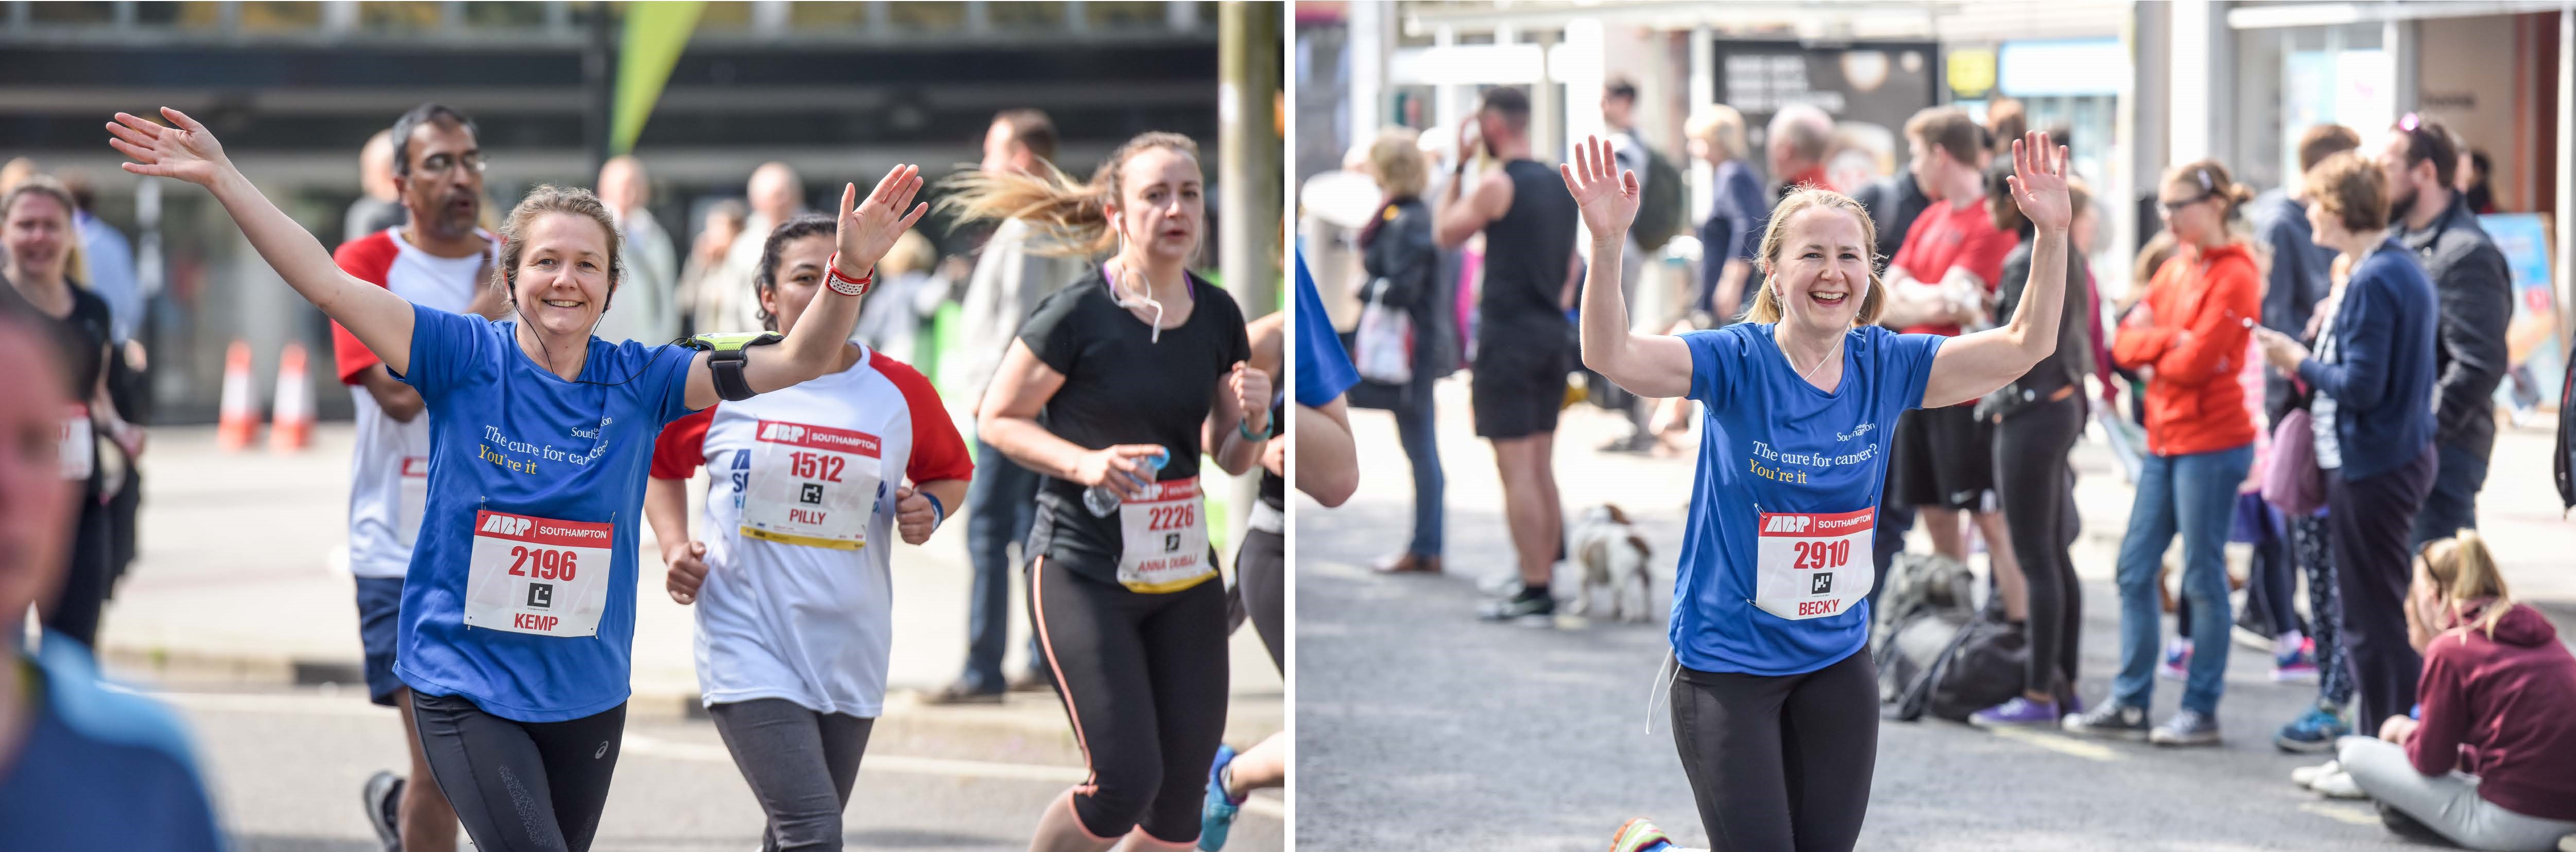 two photos of marathon runners fundraising for the centre for cancer immunology. They are both happy and waving their arms in the air.